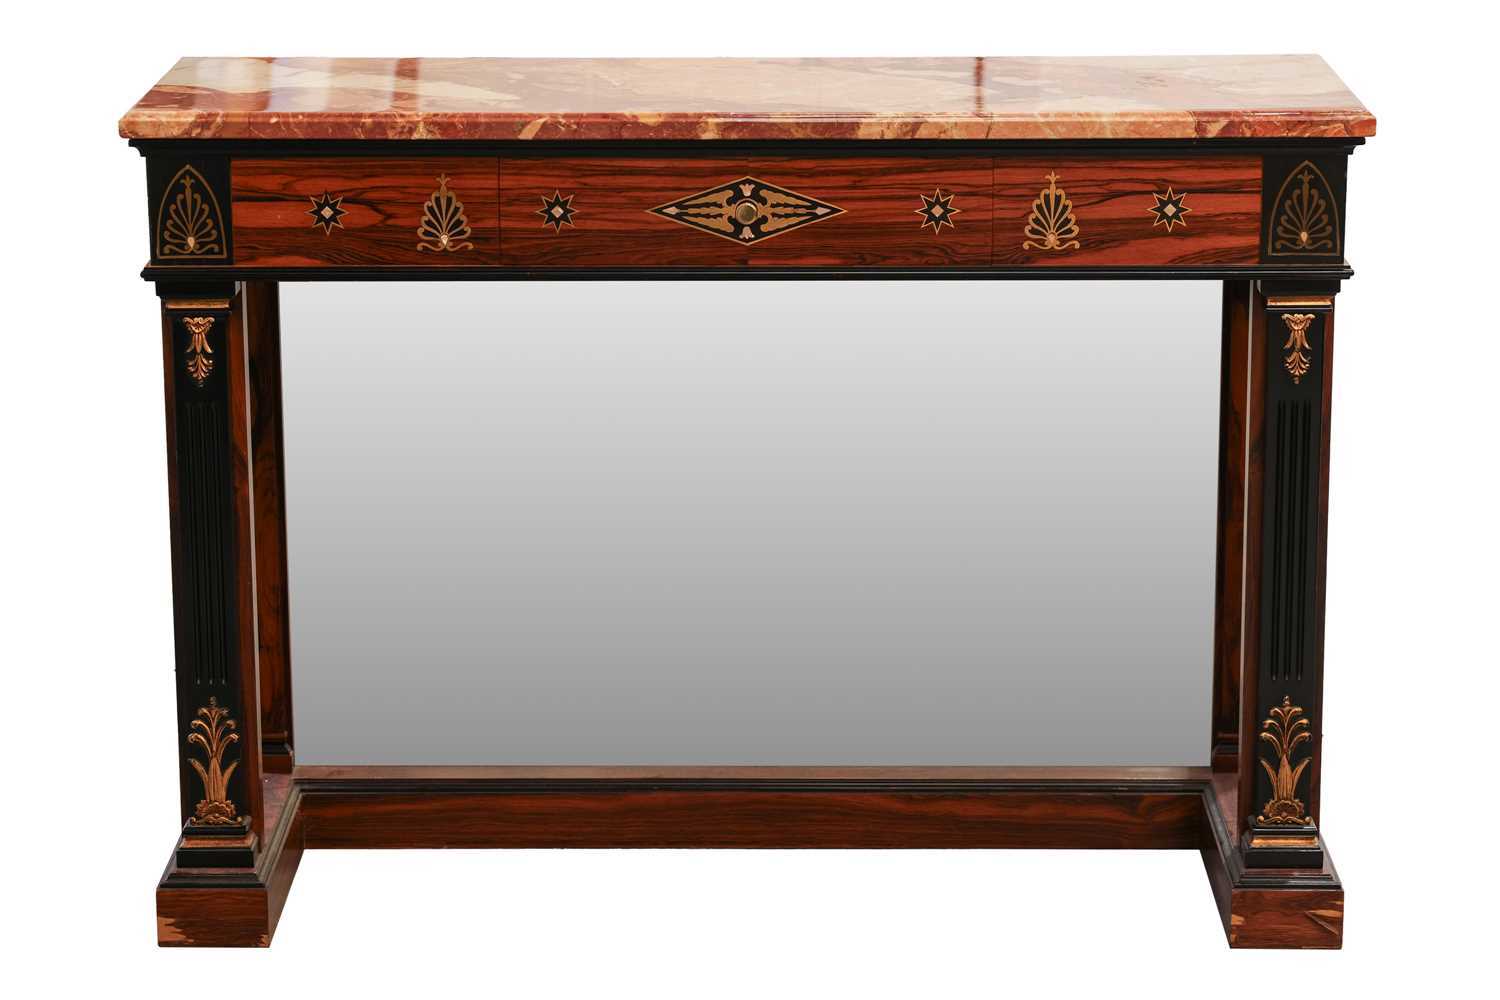 A 20th century French Empire style marble-topped brass marquetry inlaid zebrano side table, with a s